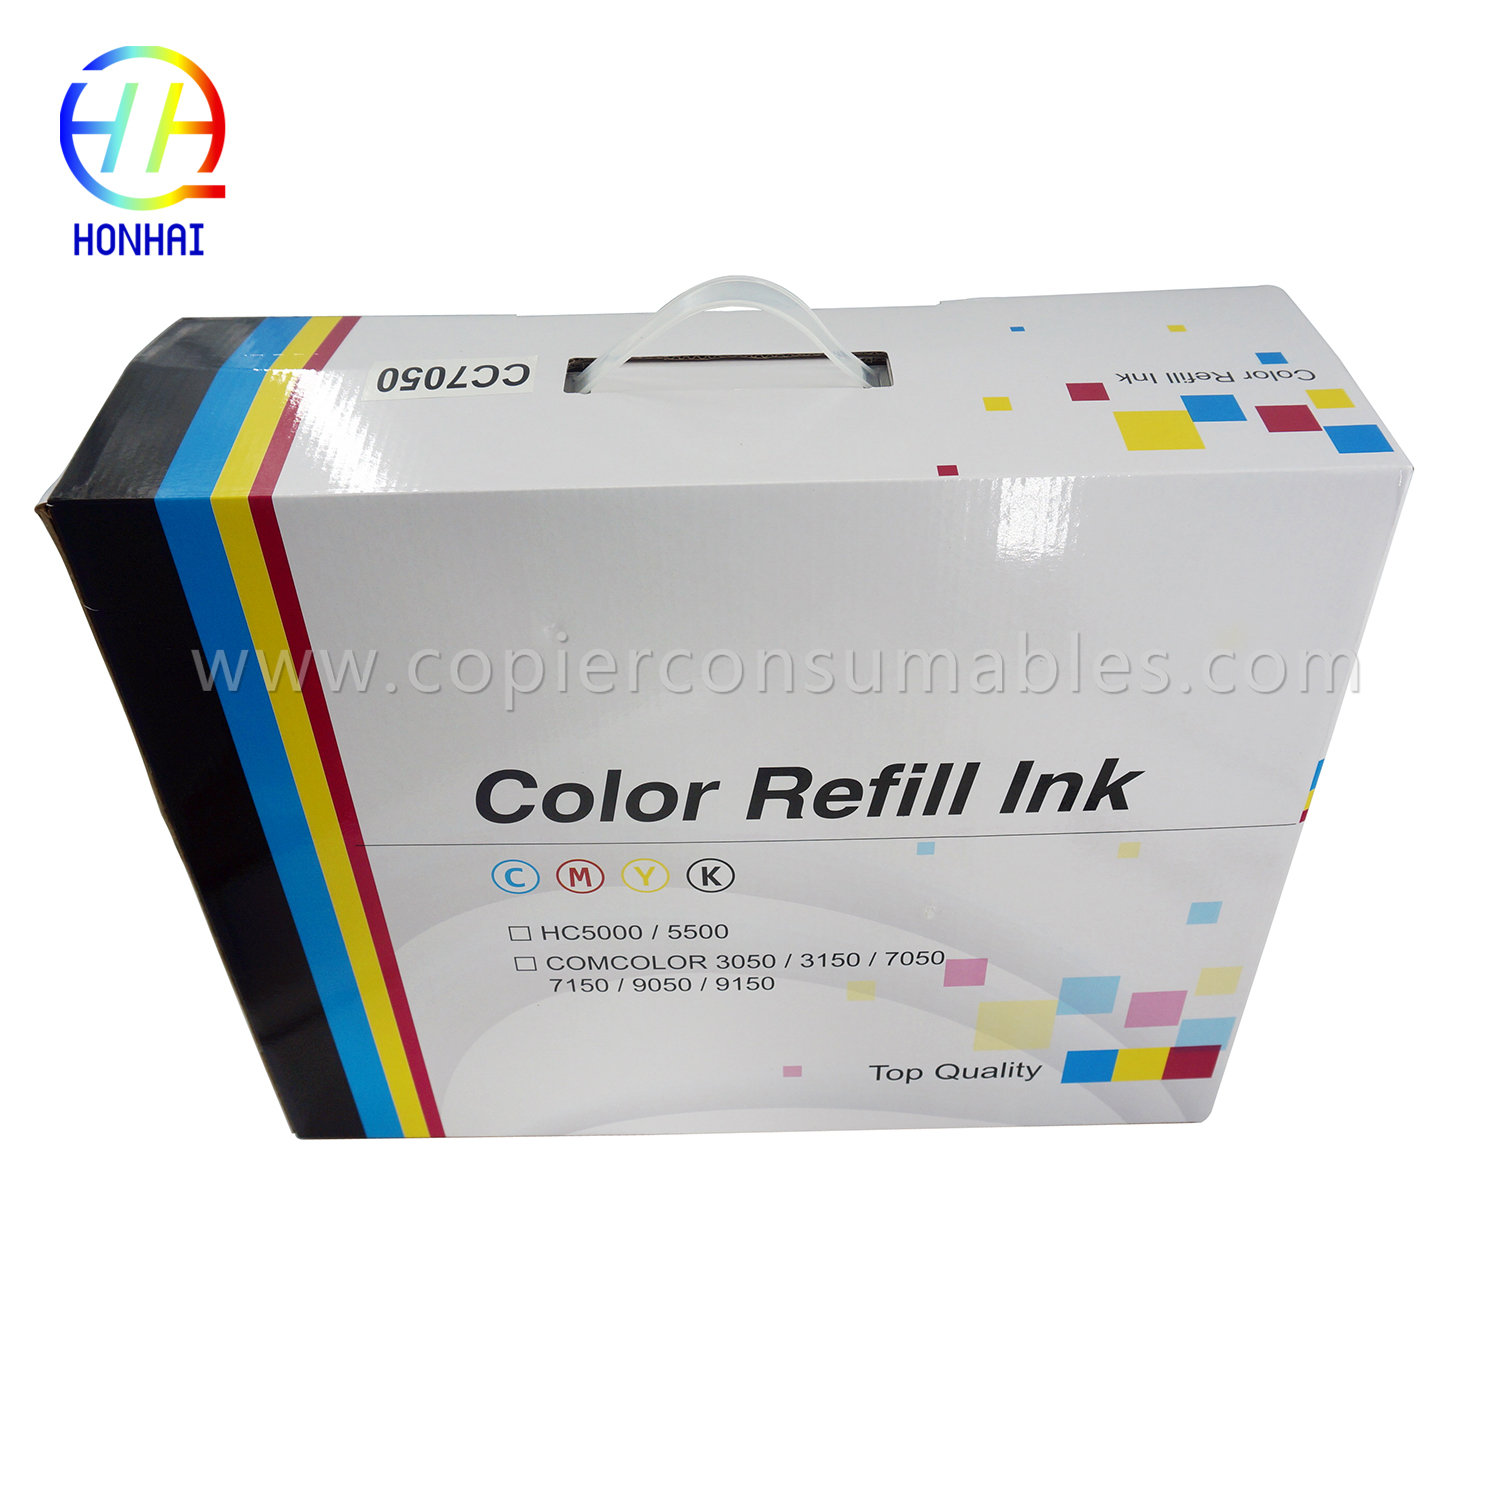 Ink Cartridge Risograph ComColor 3010 3050 3150 7010 7050 7150 9050 9150 HC 5000 5500 (S-6300G S-6301G S-6302G S-6303G) (1)